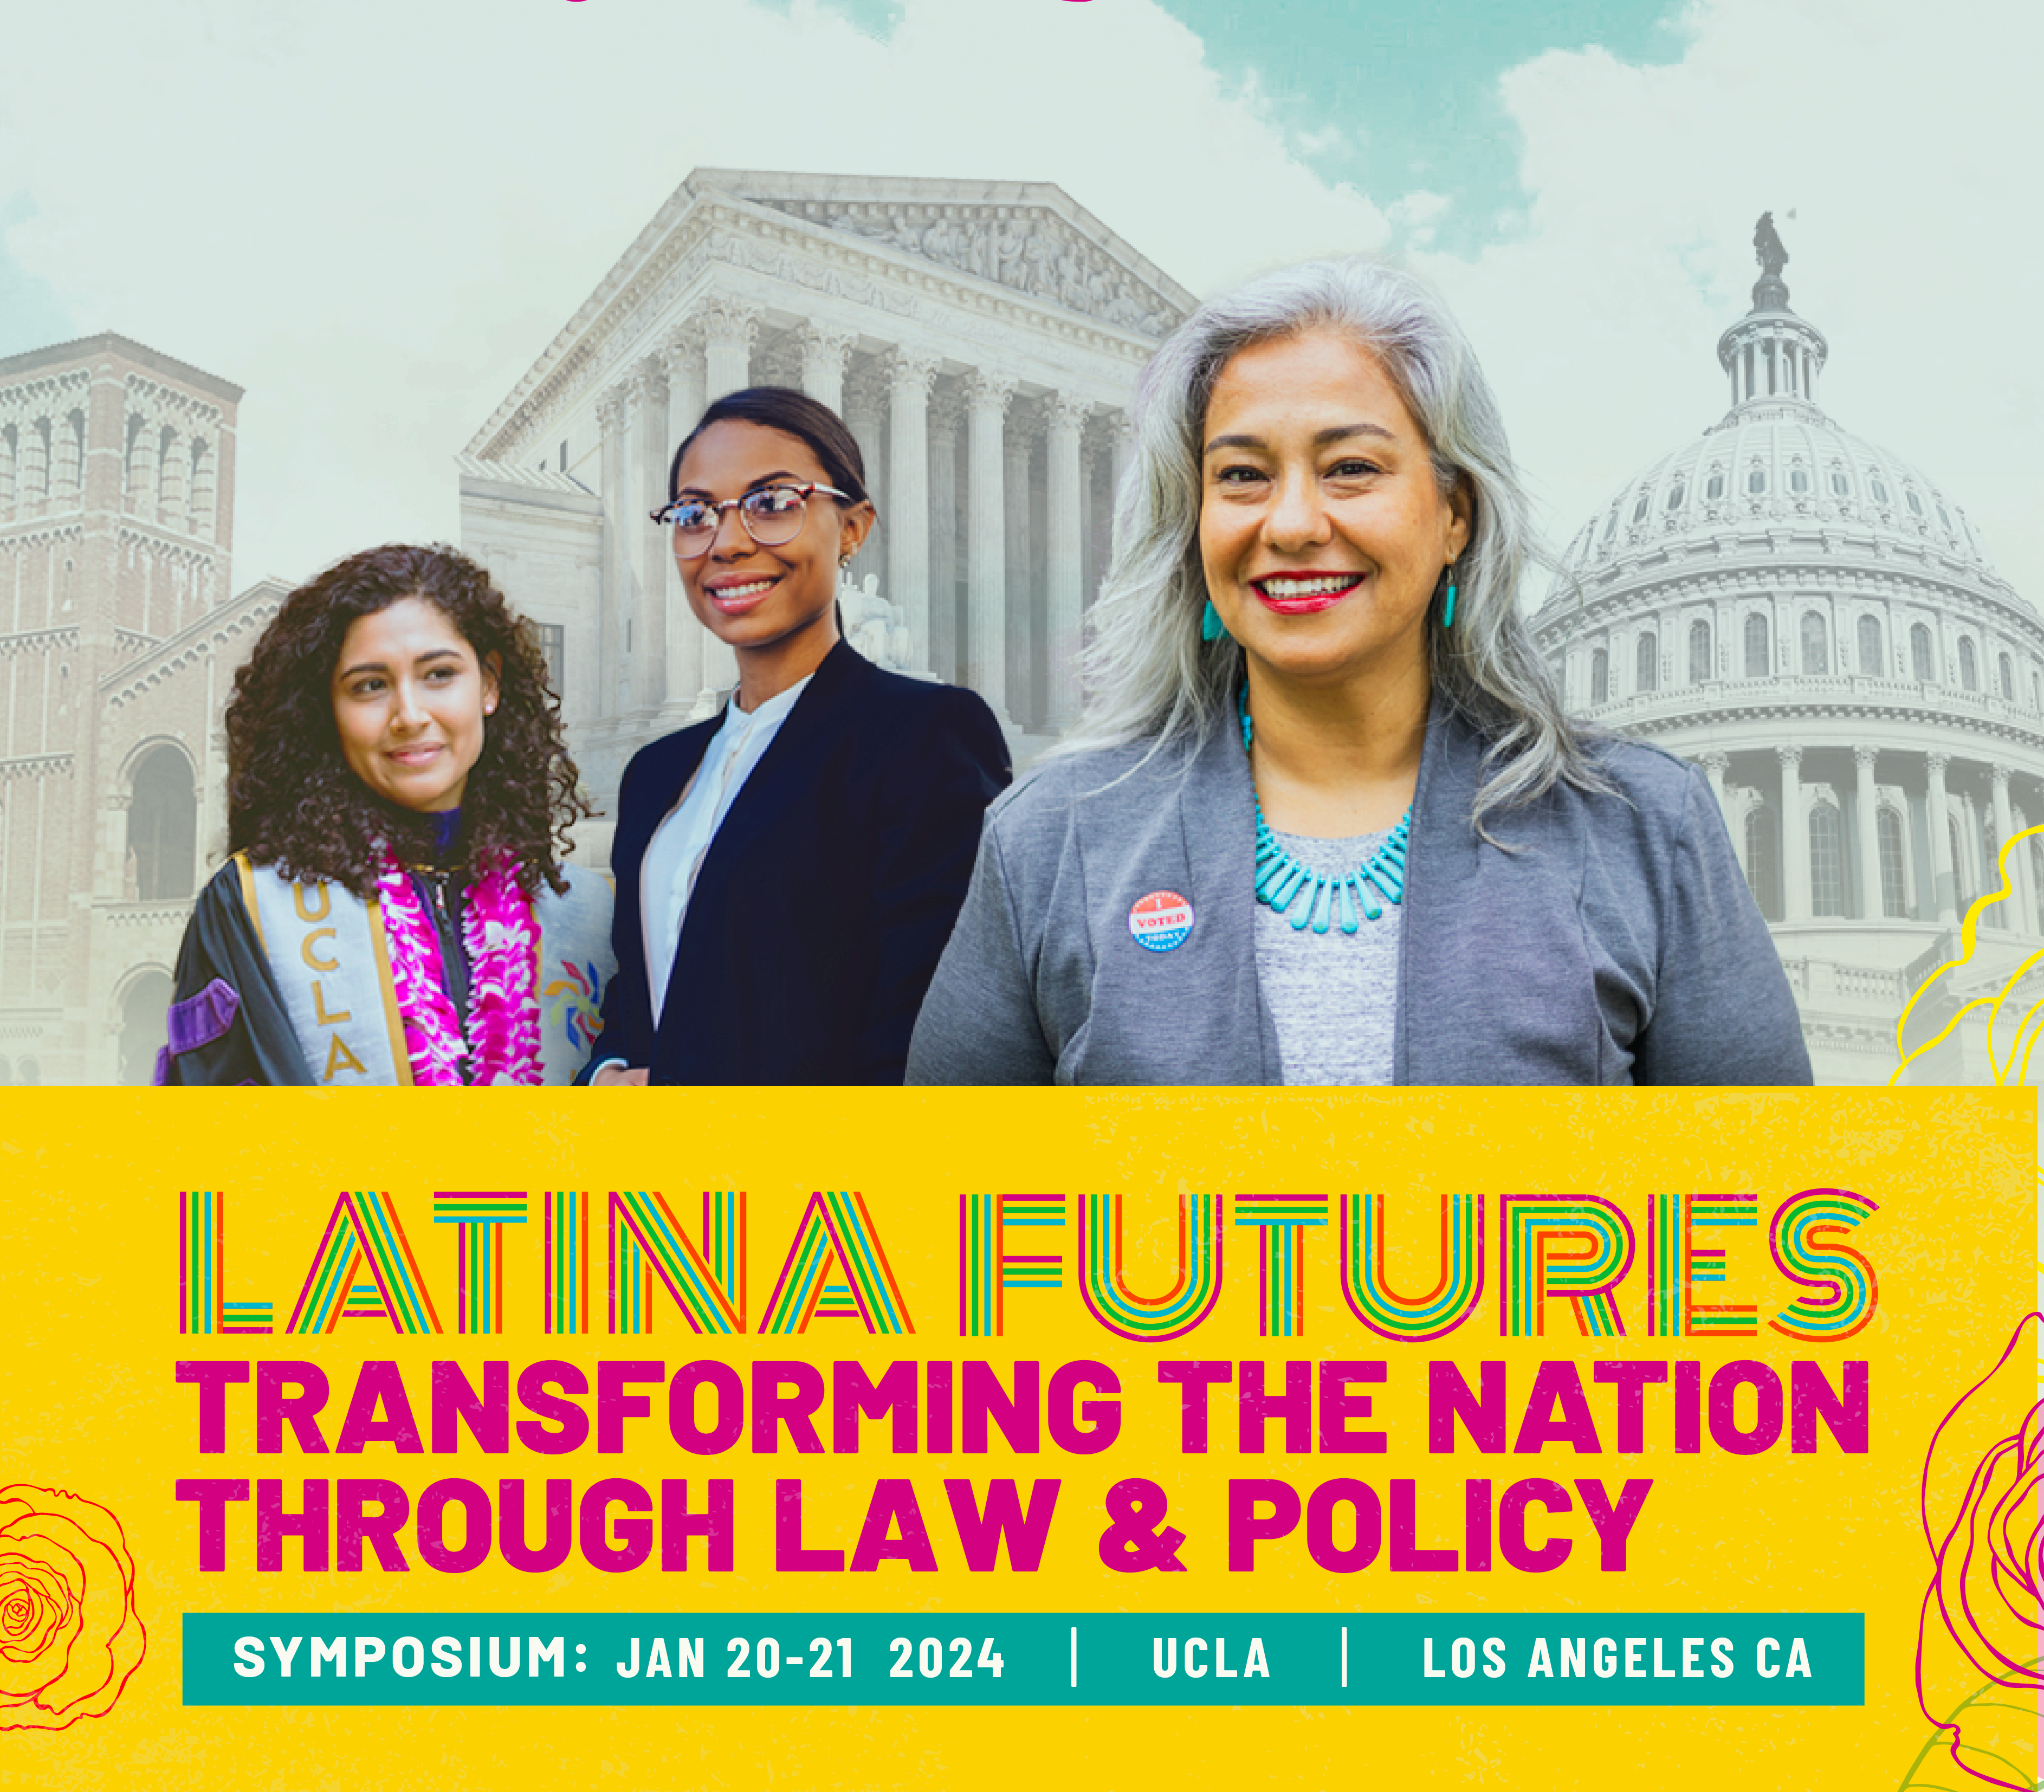 UCLA Hosts “Latina Futures: Transforming the Nation Through Law and Policy” Symposium